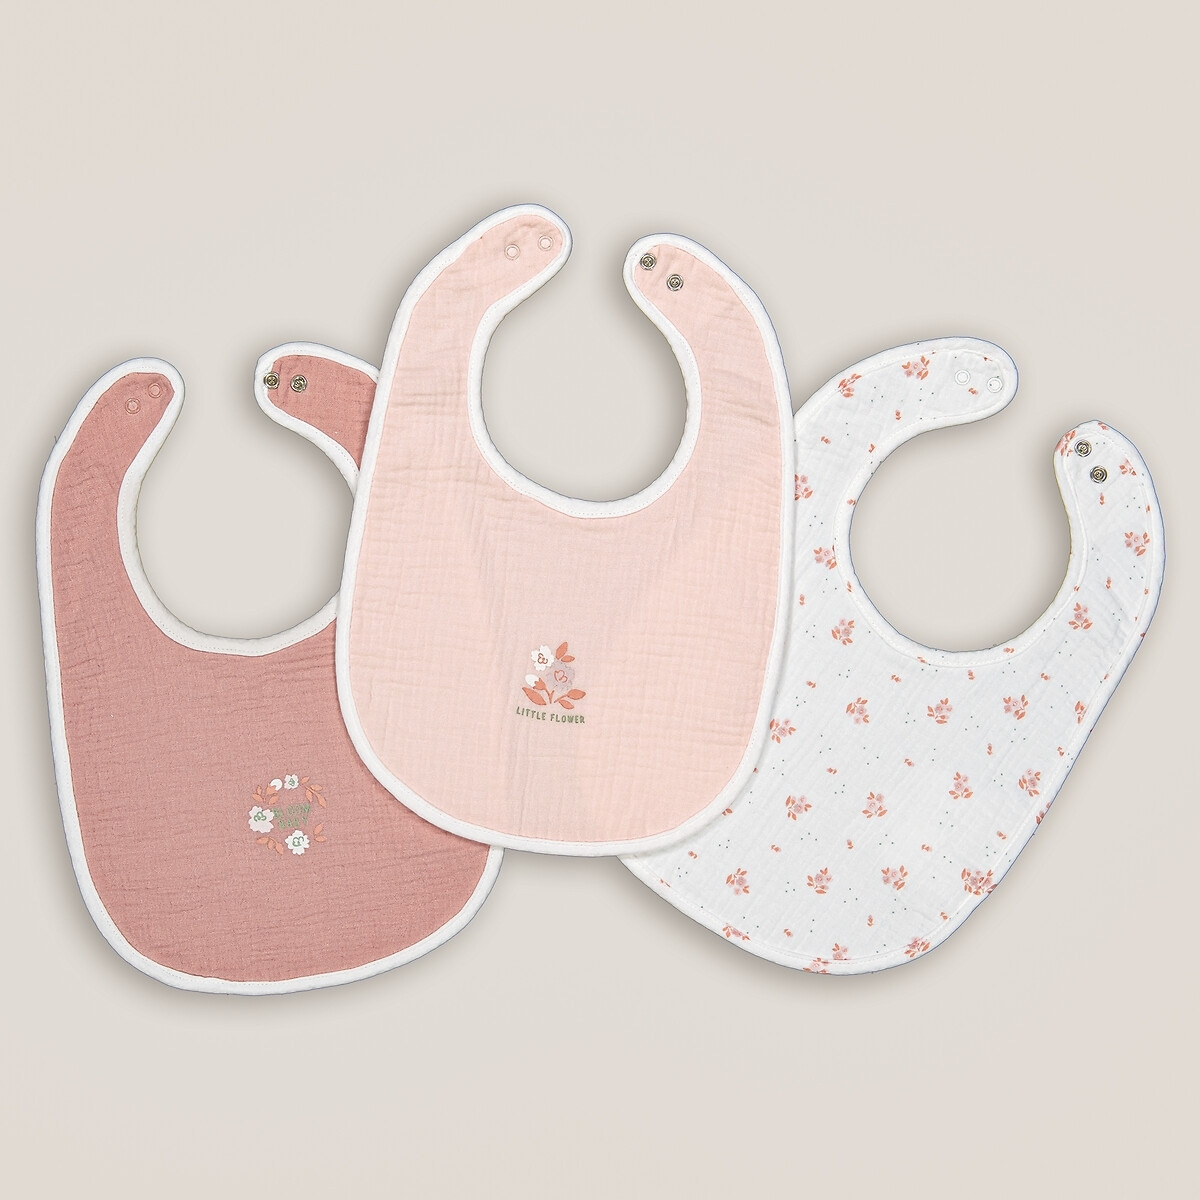 Pack of 3 Bibs in Cotton Jersey/Towelling - image 1